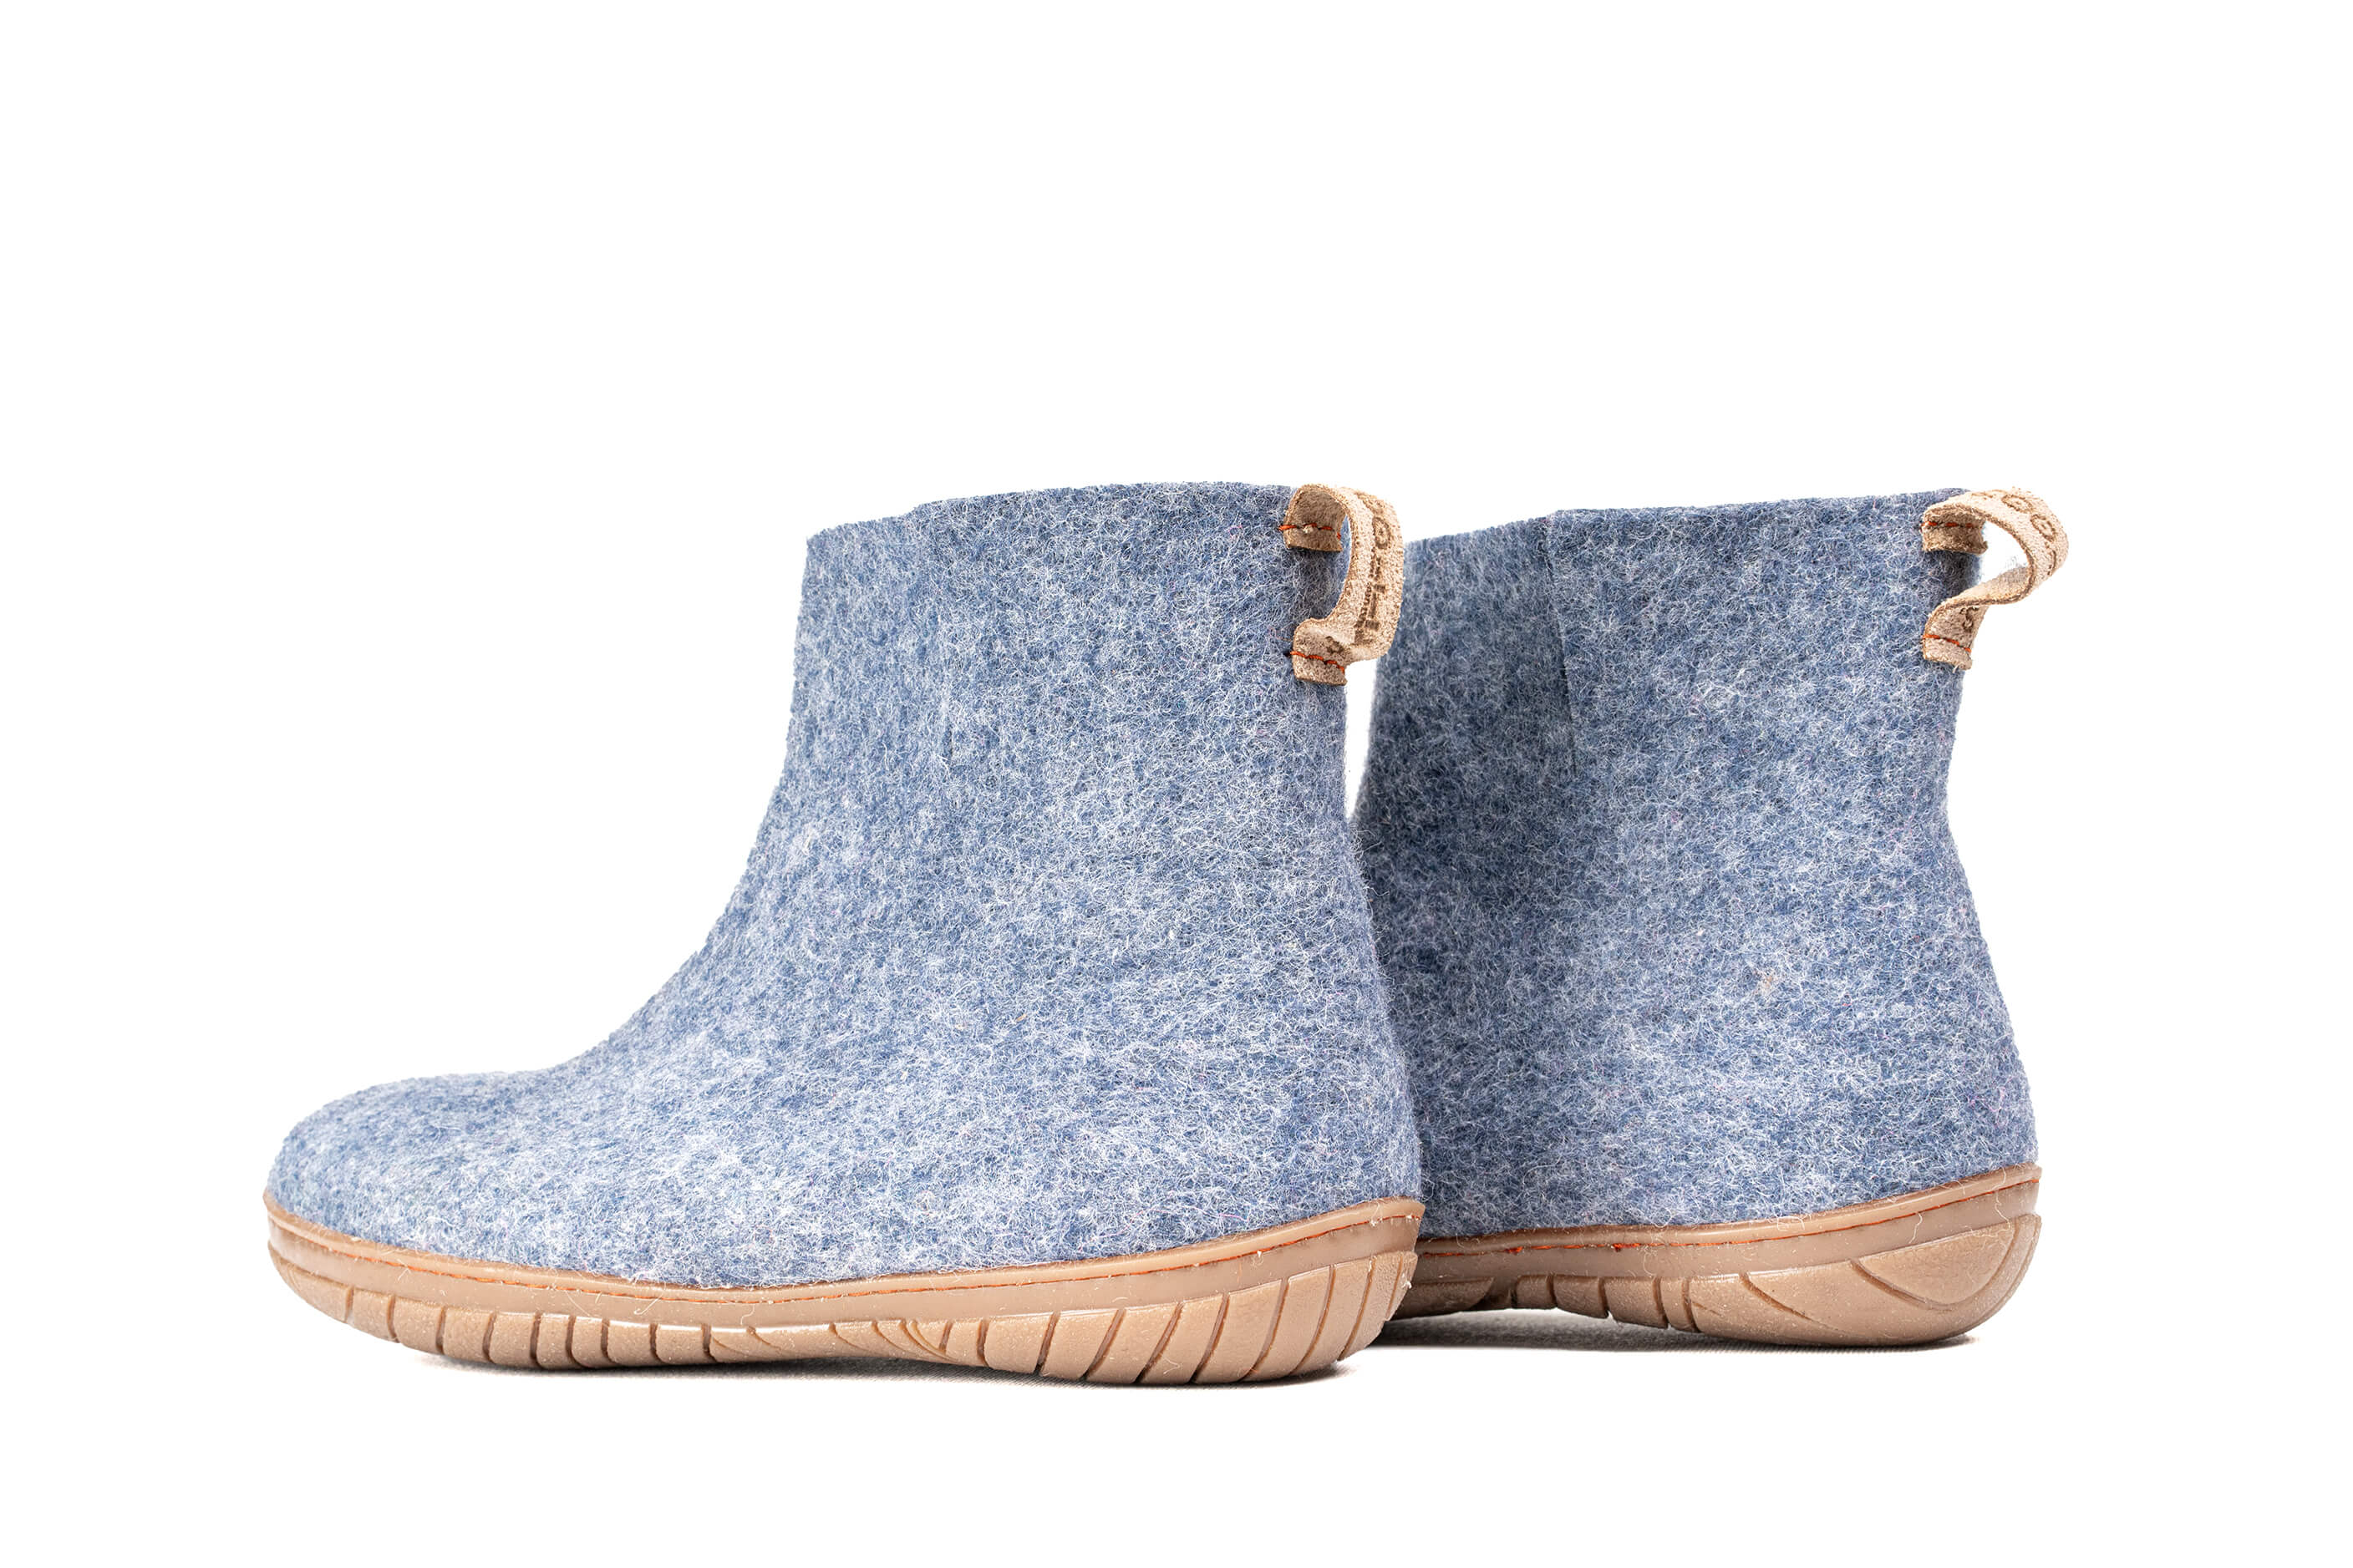 Outdoor Low Boots With Rubber Sole - Denim